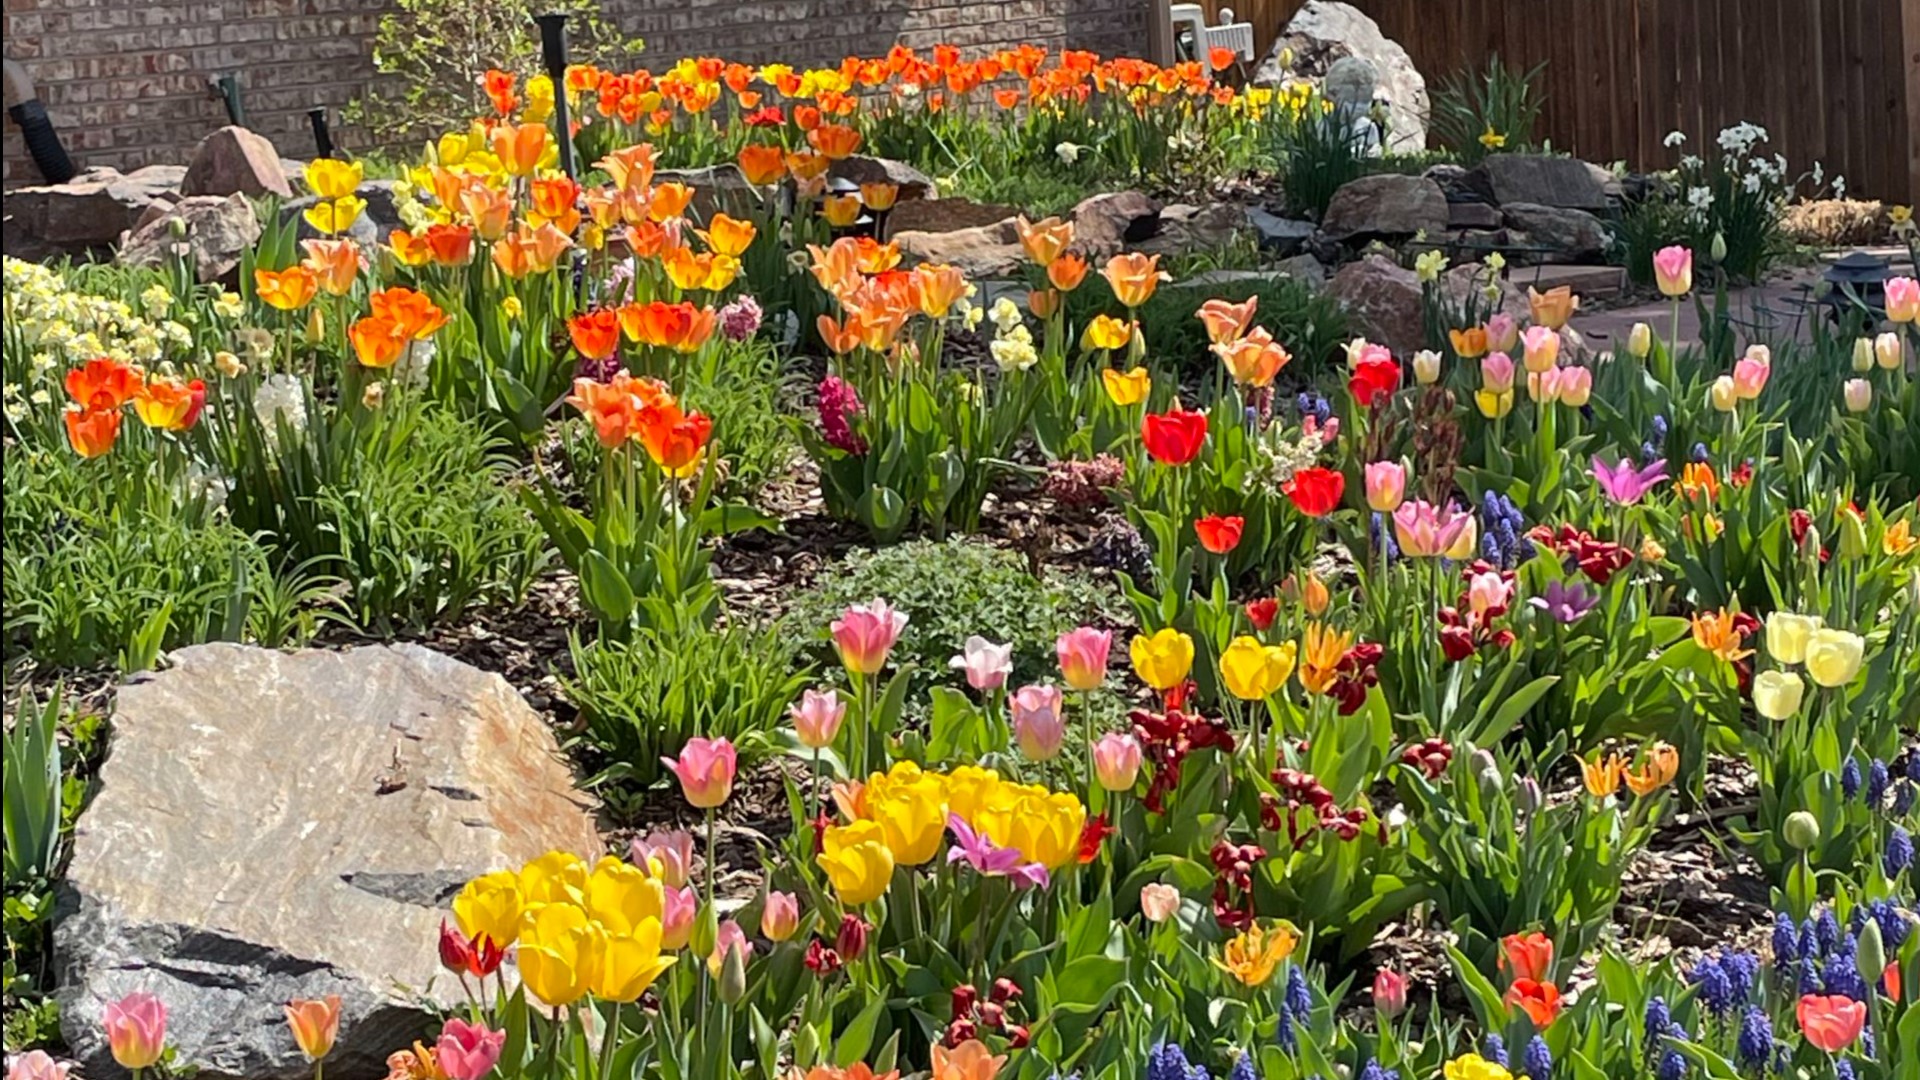 There are plenty of tulips for a moment of zen - a break from the litany of tragedy that too often makes up the "news."